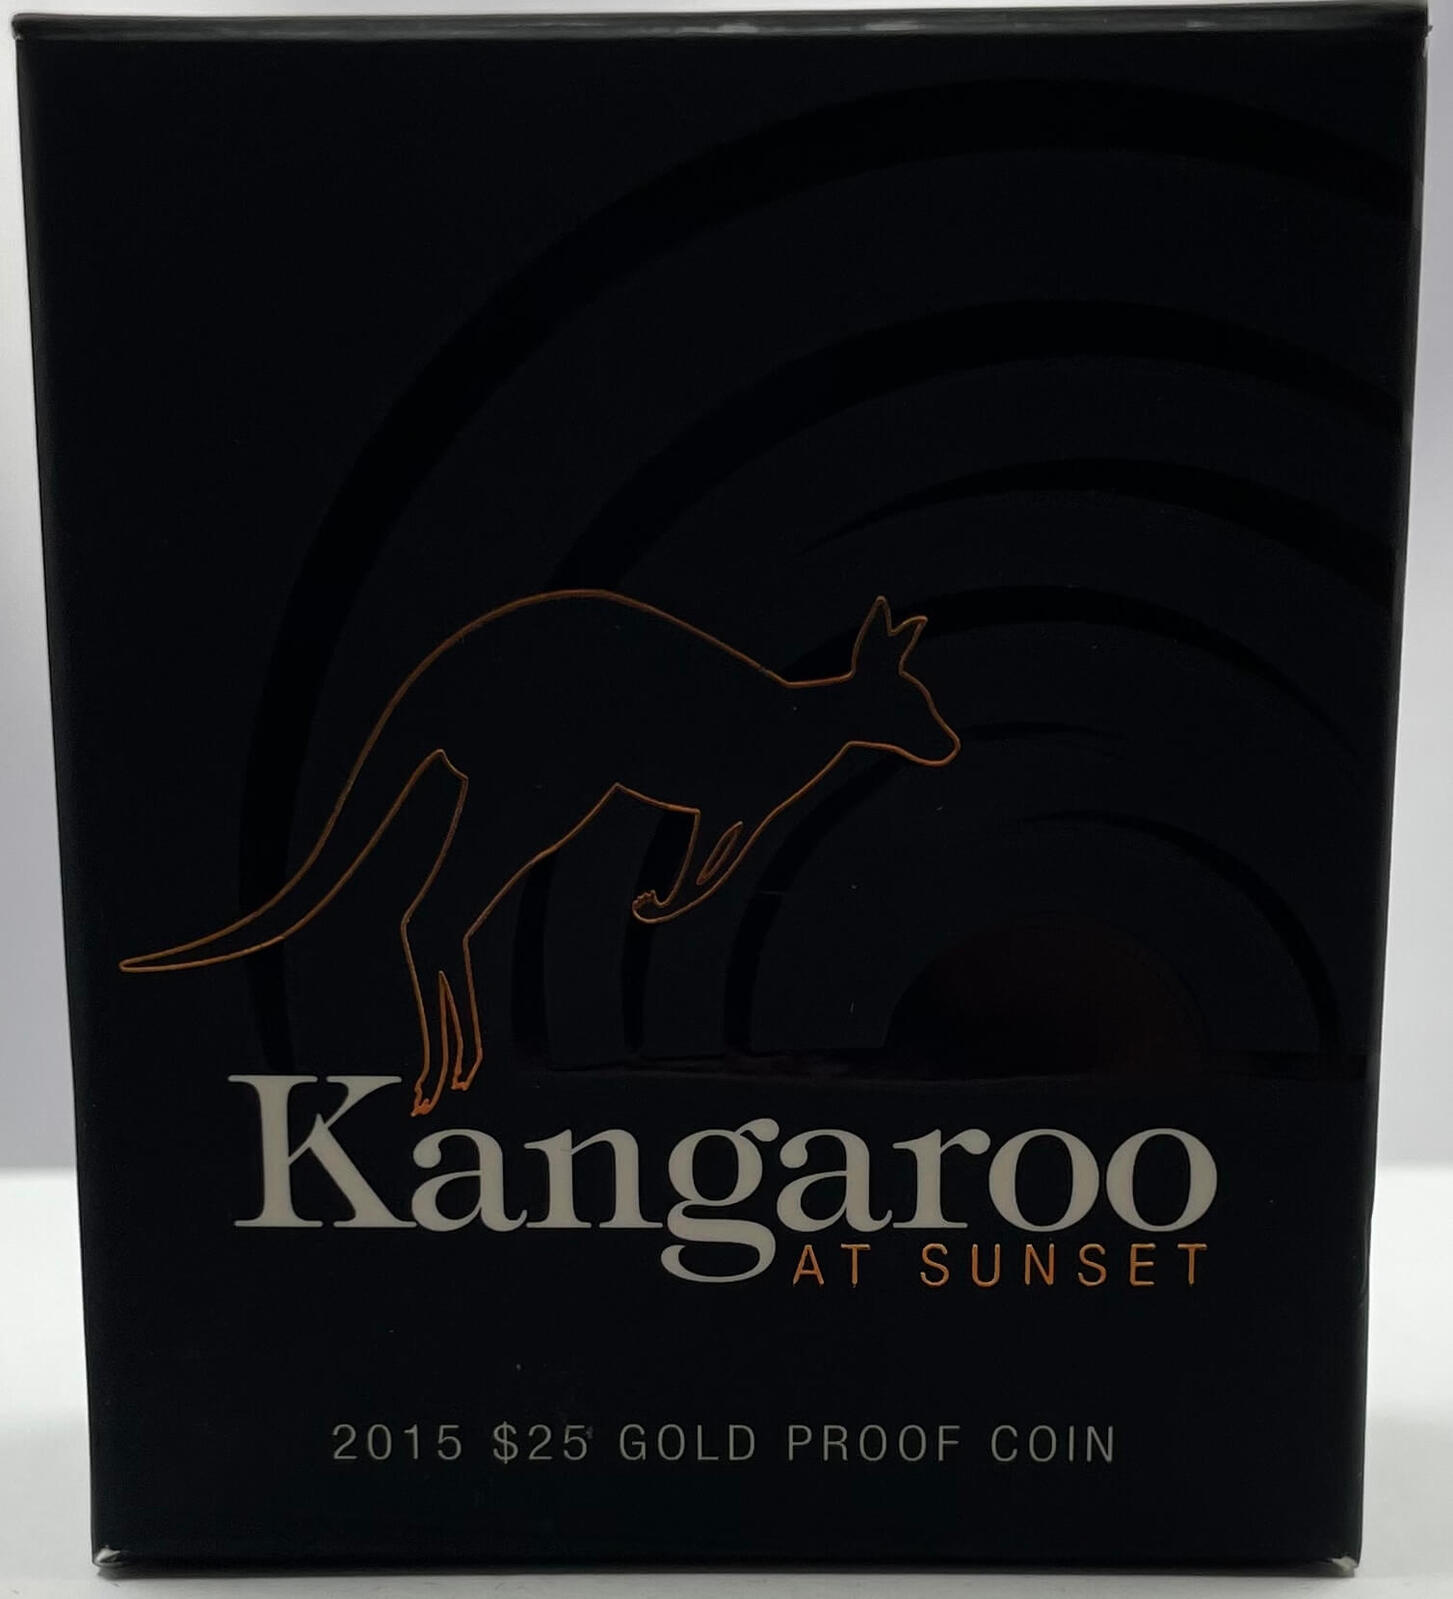 2015 $25 Gold Proof Coin Kangaroo at Sunset product image